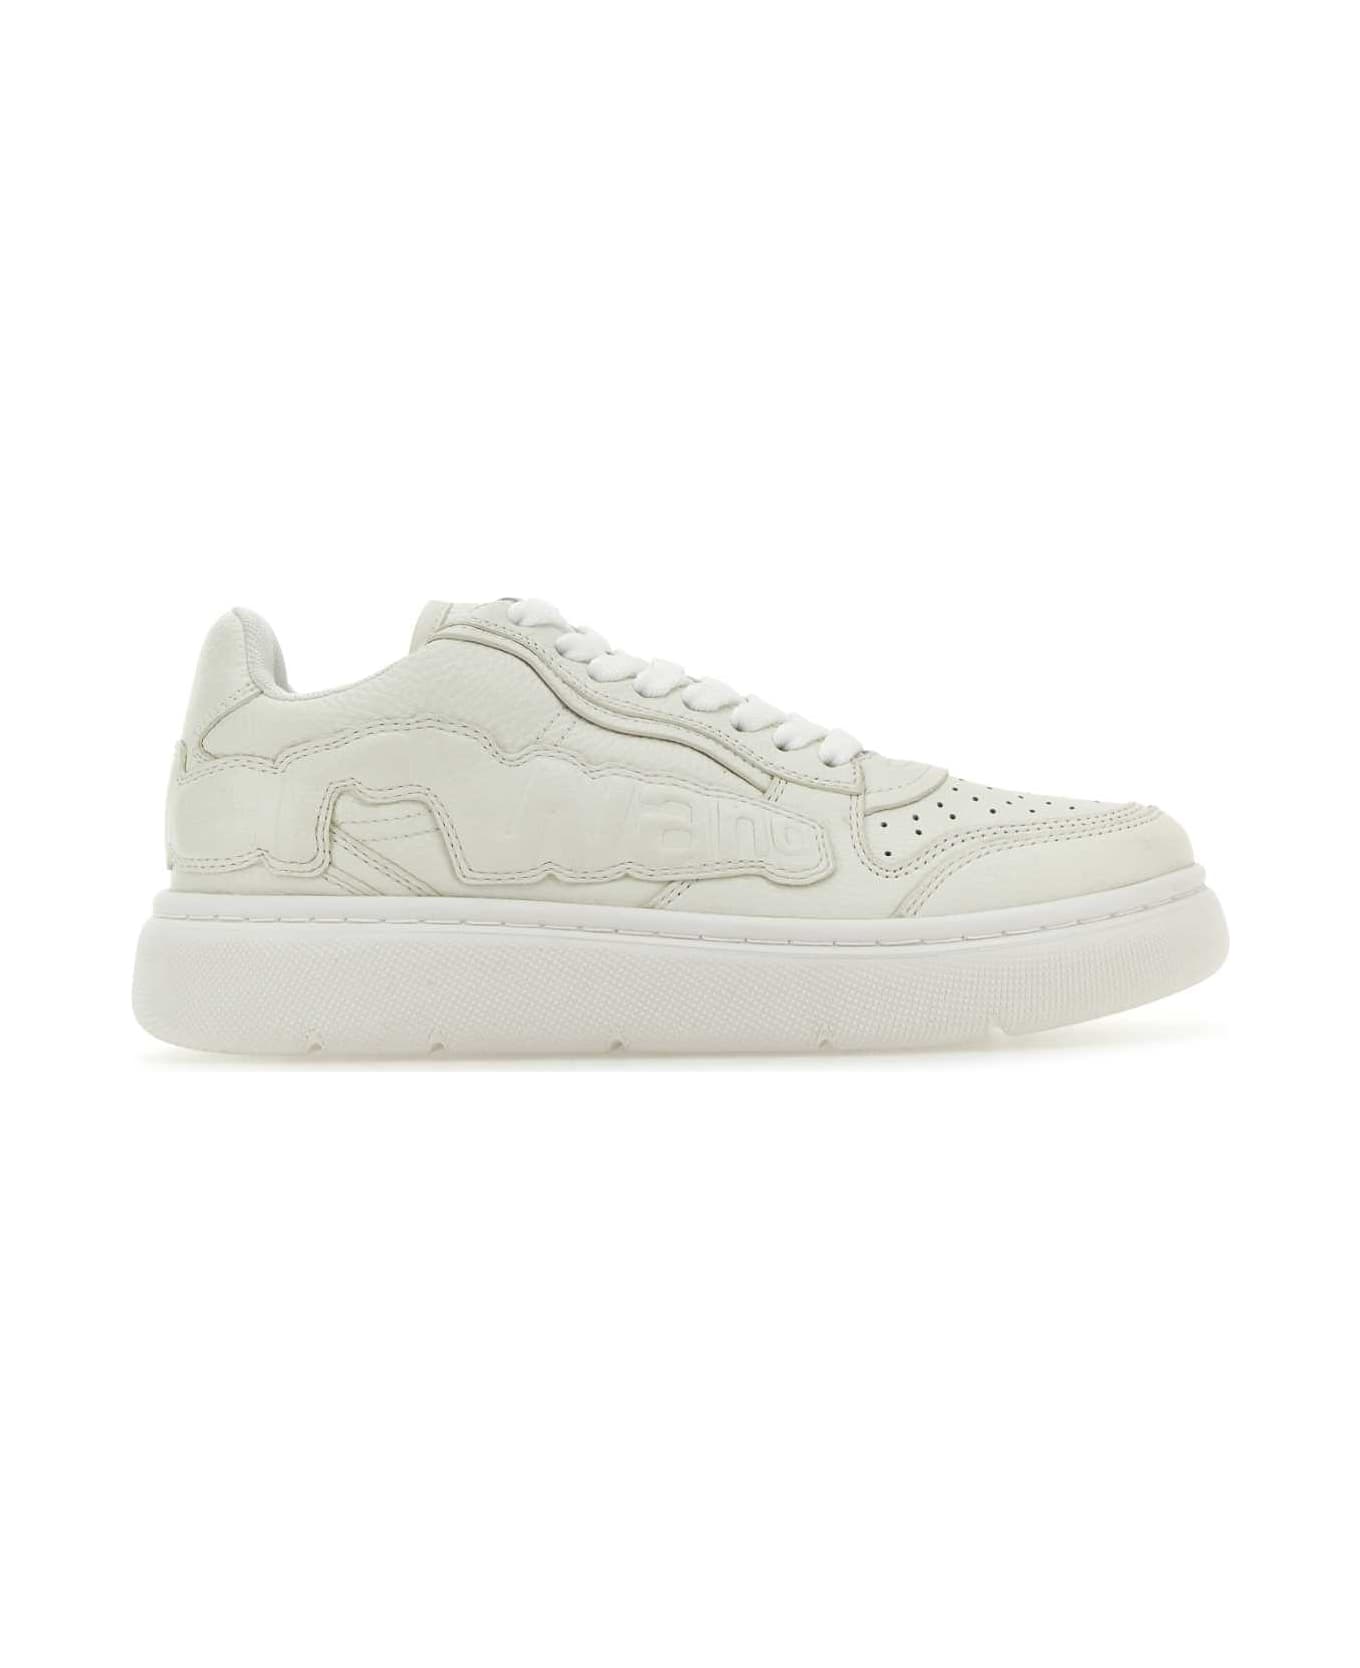 Alexander Wang White Leather Puff Sneakers - OPTICWHITE